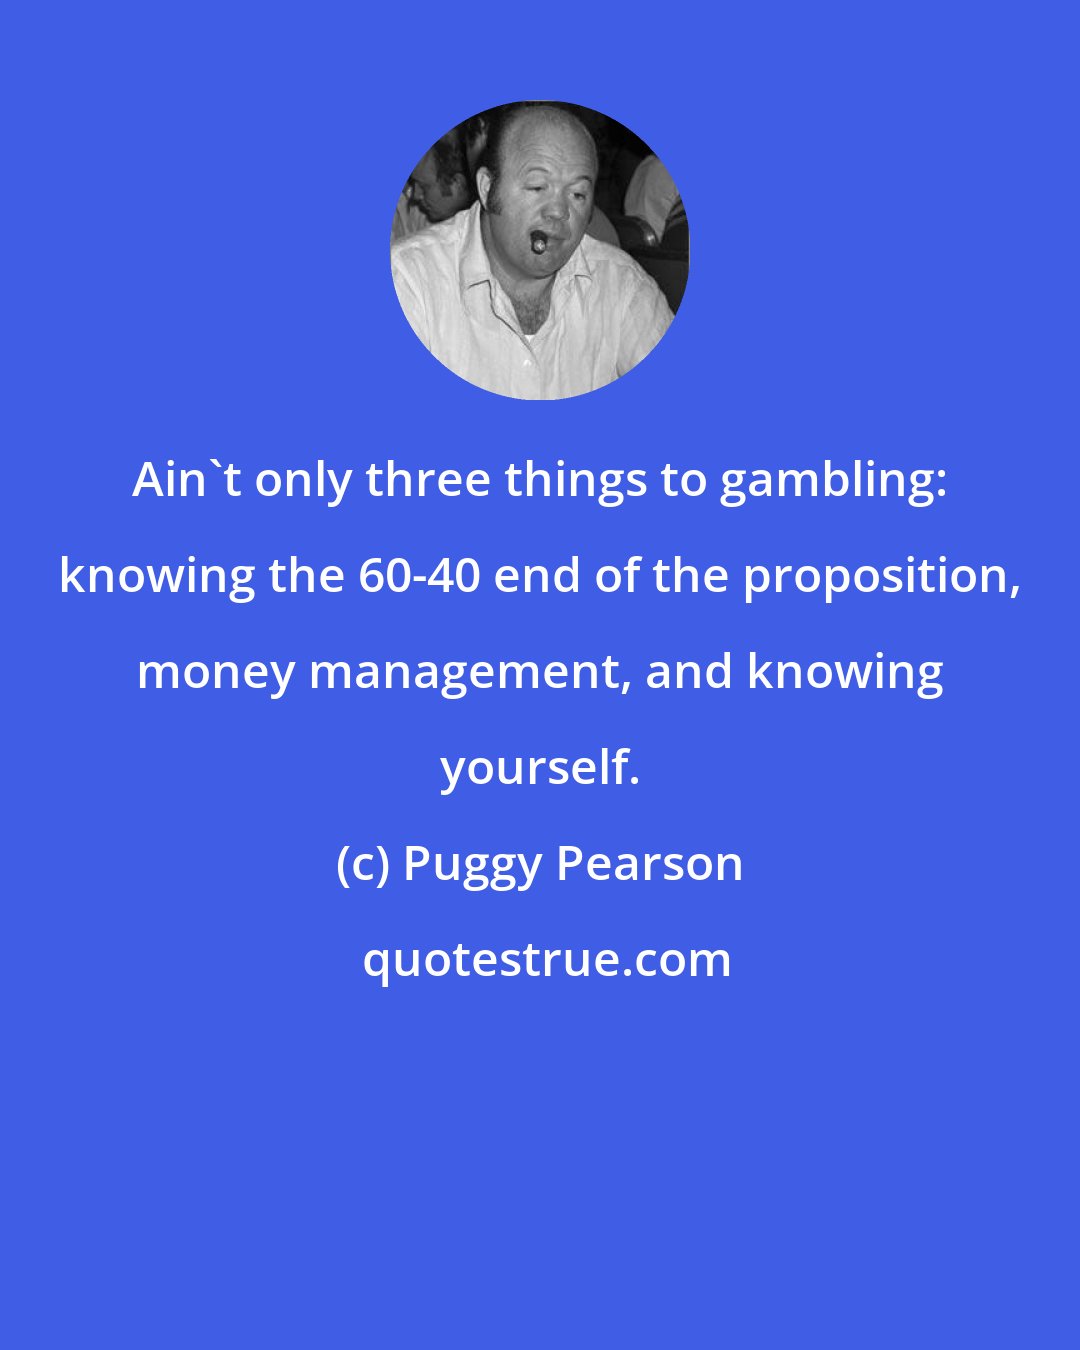 Puggy Pearson: Ain't only three things to gambling: knowing the 60-40 end of the proposition, money management, and knowing yourself.